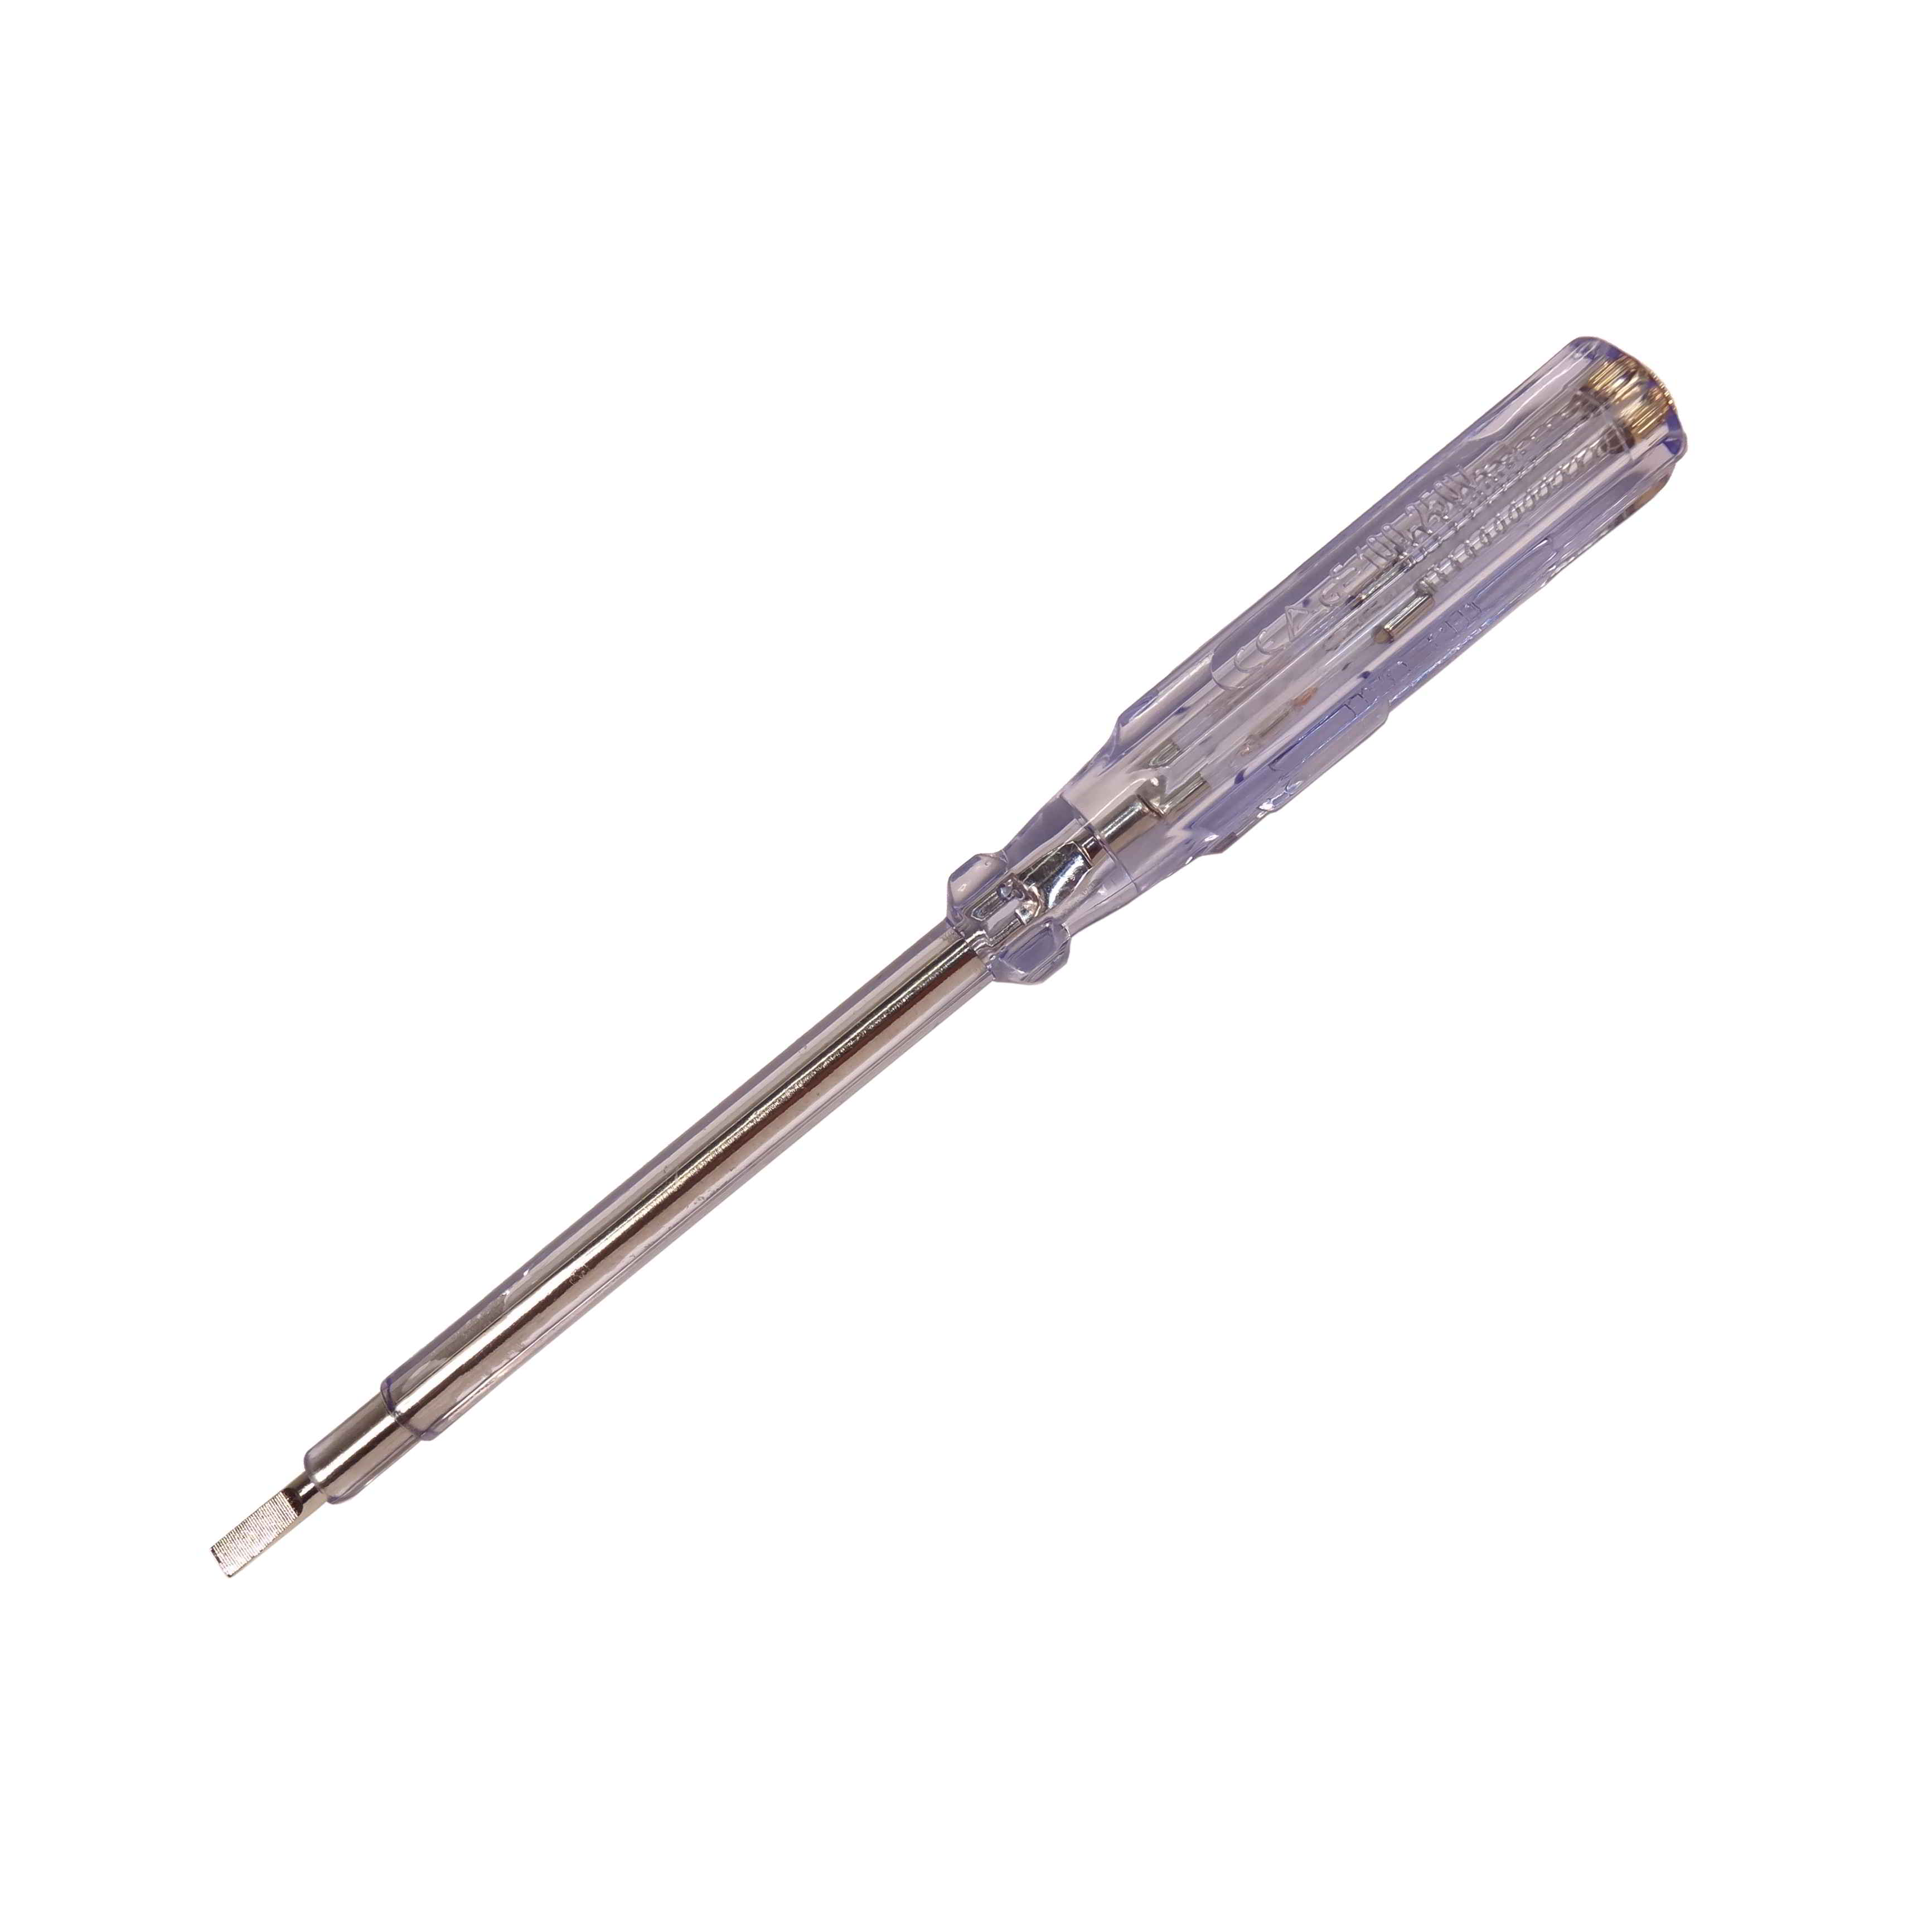 Mains Phase Tester Screwdriver